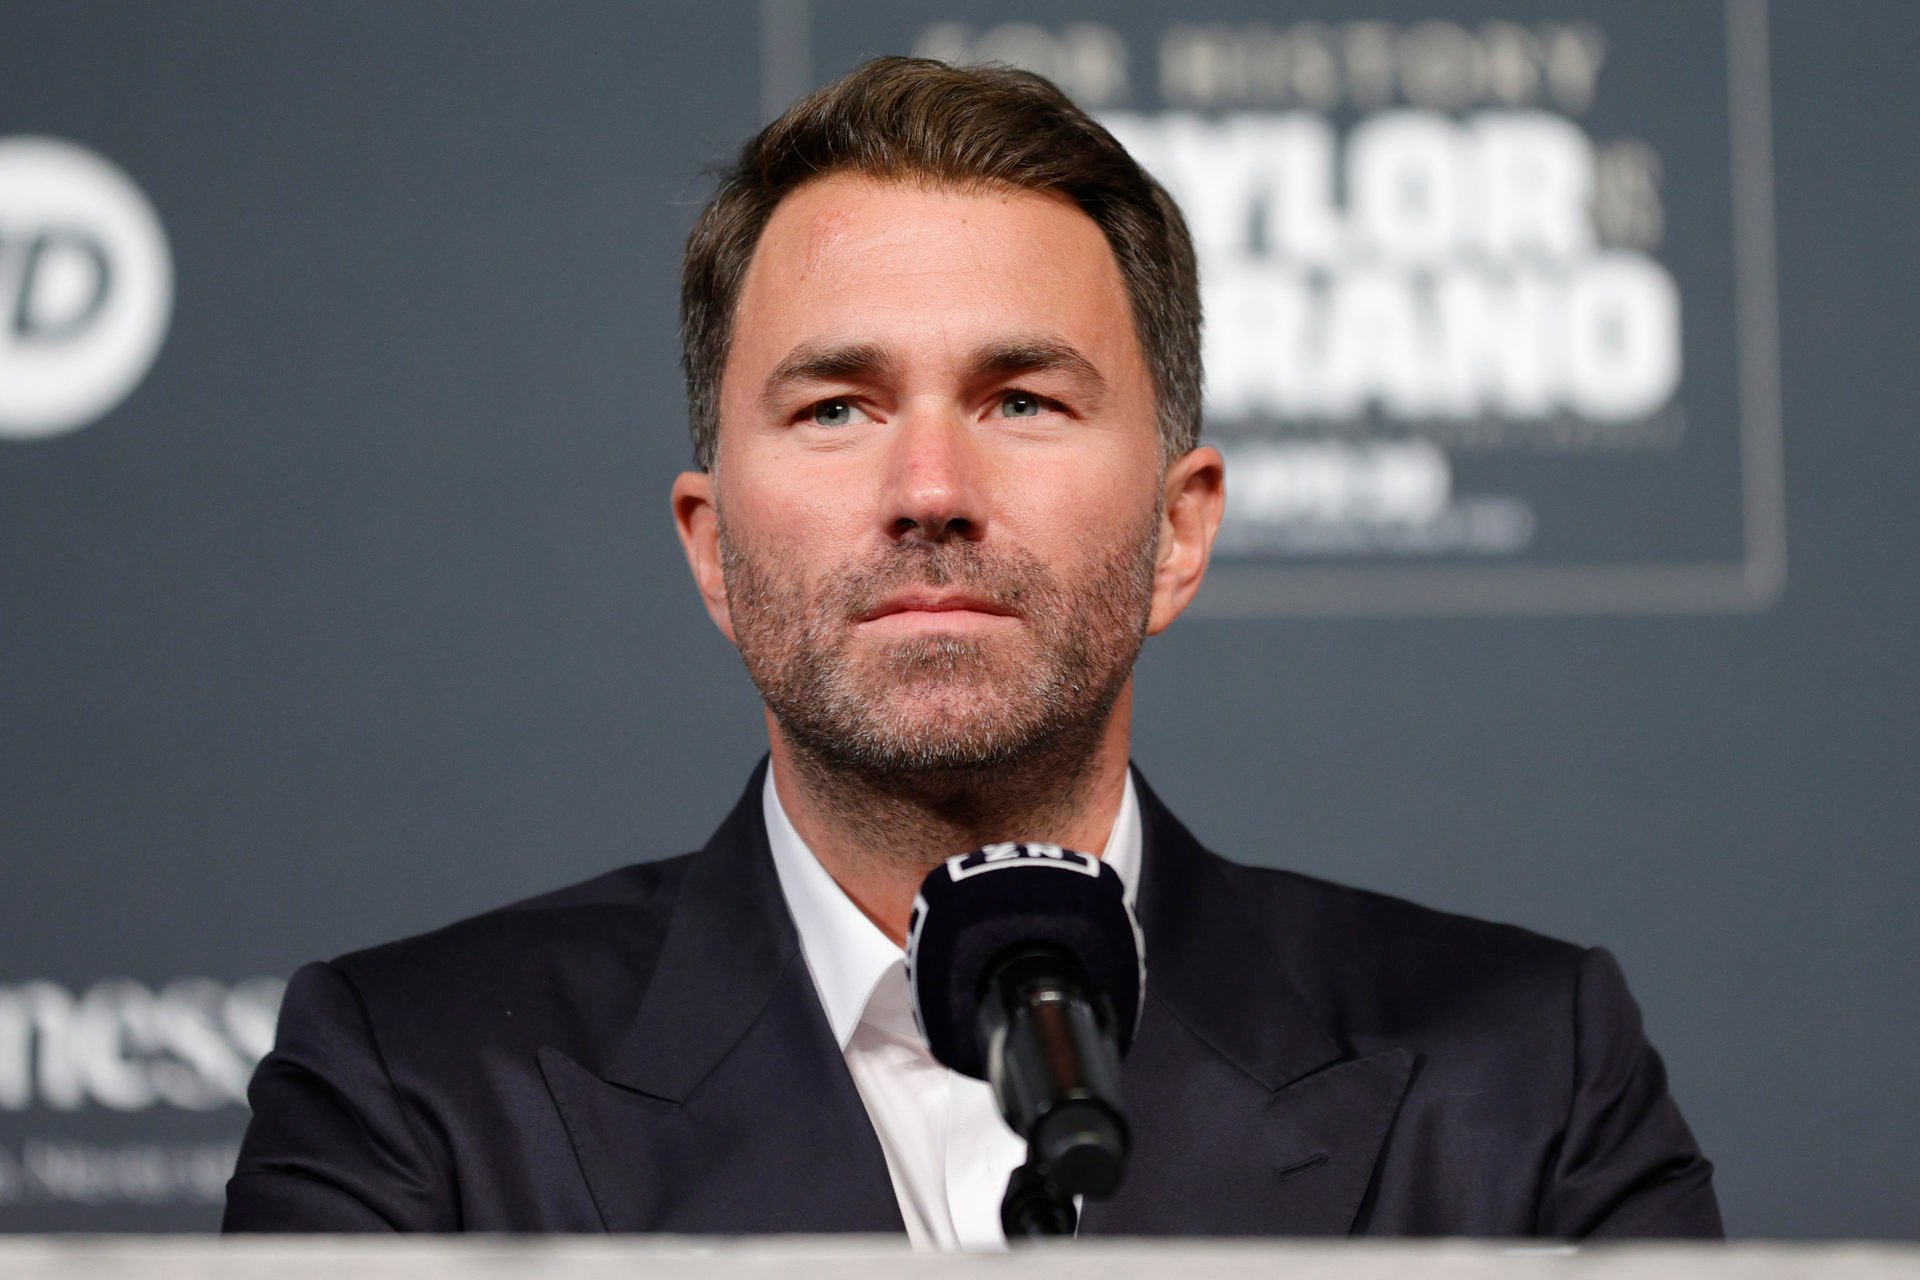 Inside Eddie Hearn’s impressive net worth and boxing promoter career